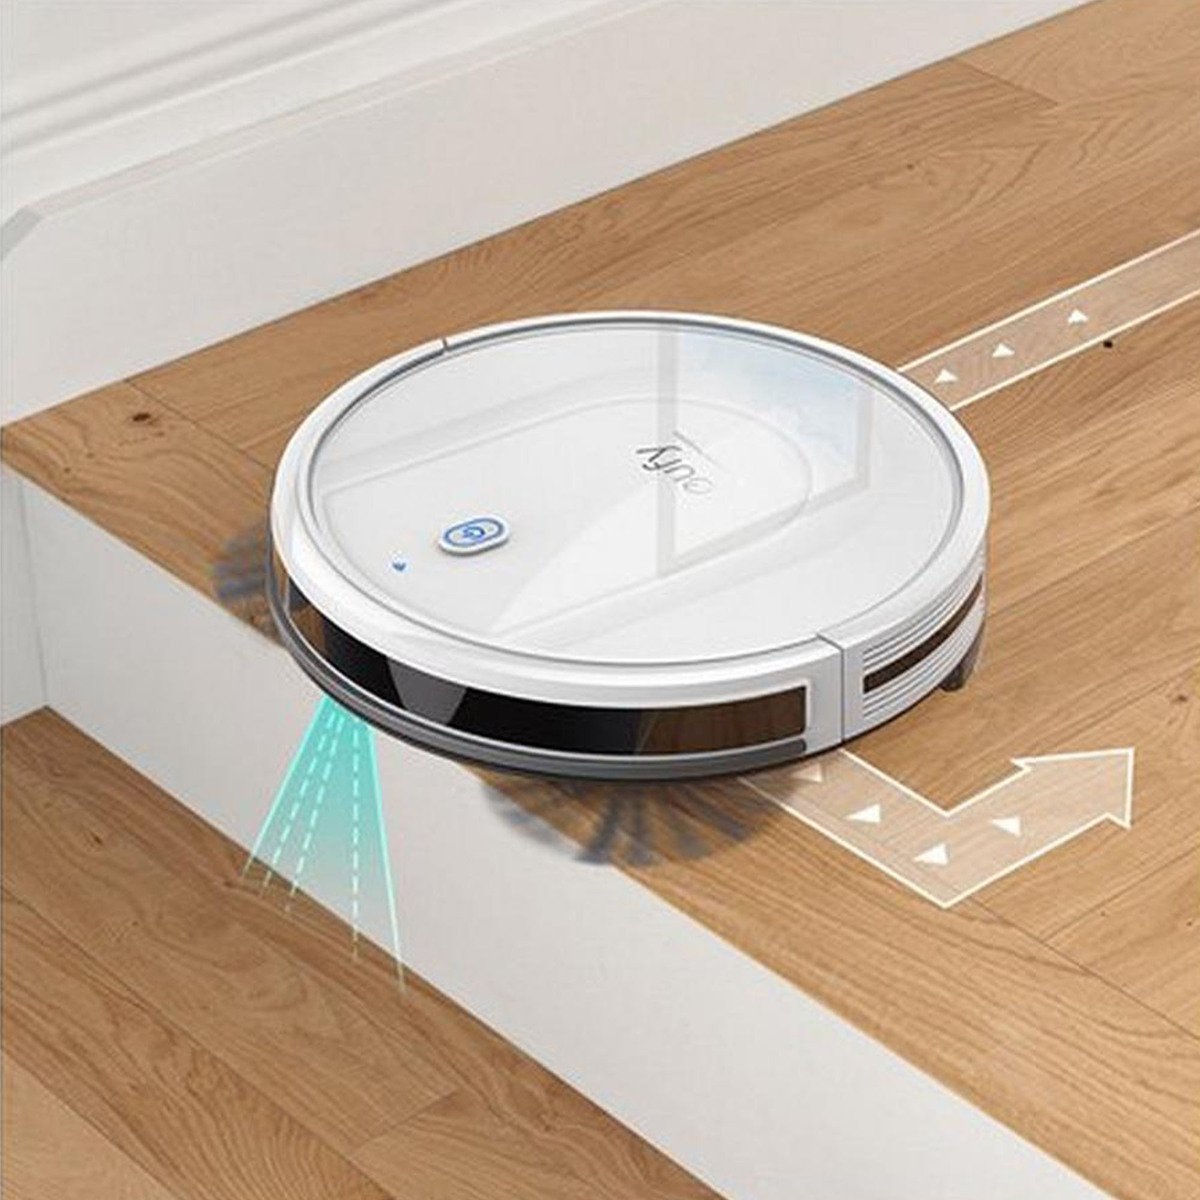 Eufy Vaccum Cleaner Robovac G10-T2150K21W Smart Dynamic Navigation, 2-in-1 Sweep and mop, Wi-Fi, Super-Slim, 2000Pa Strong Suction, Quiet, Self-Charging Robotic Vacuum